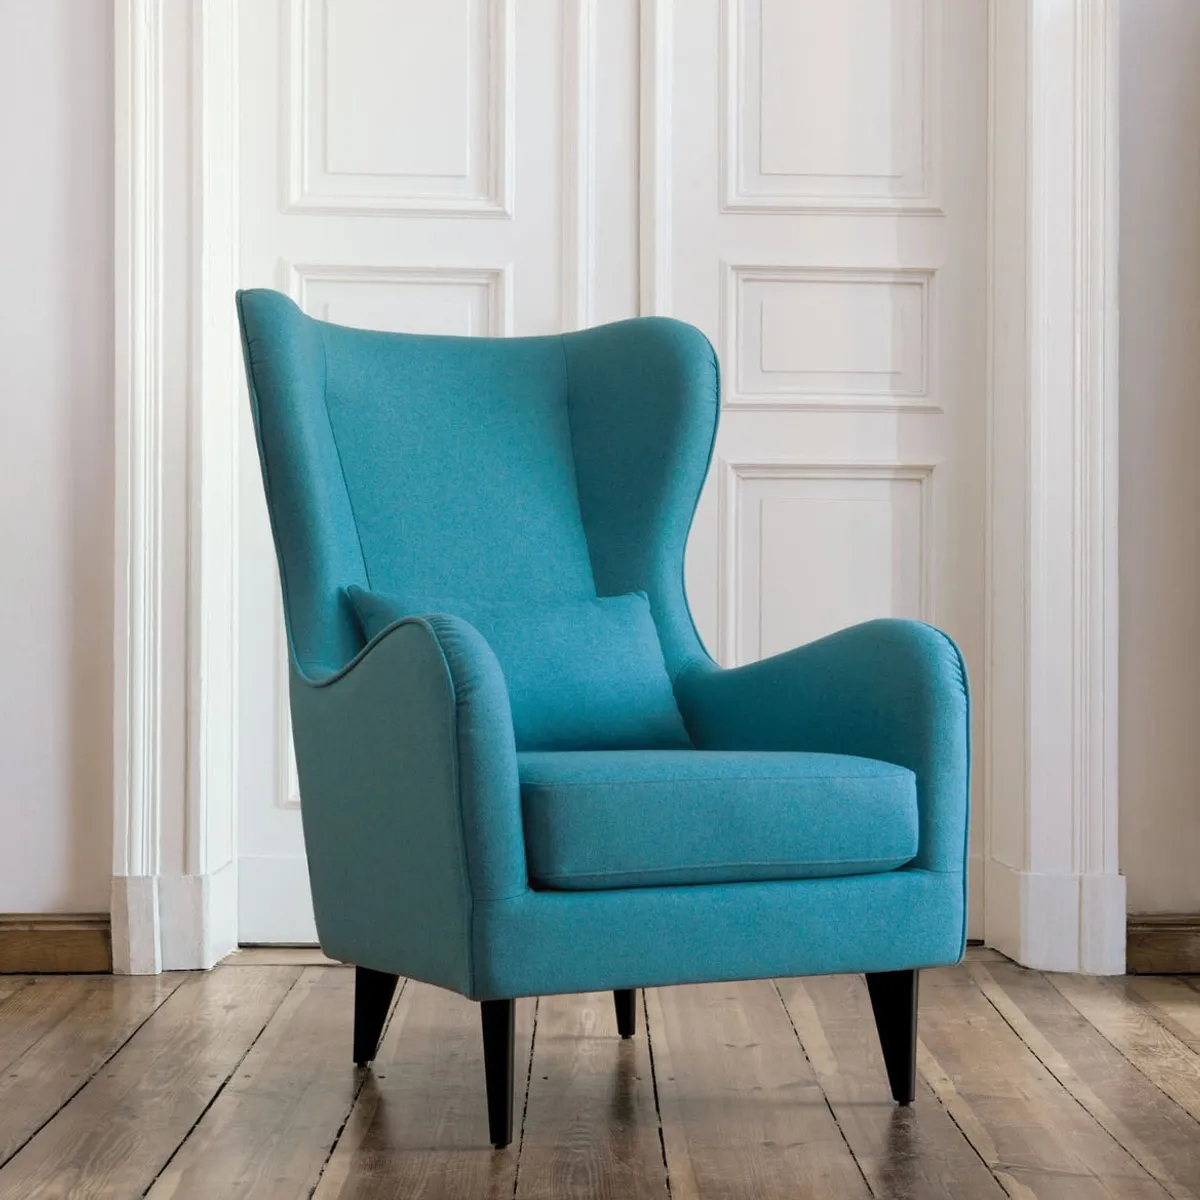 Aurland-wing-back-chair-in-turquoise